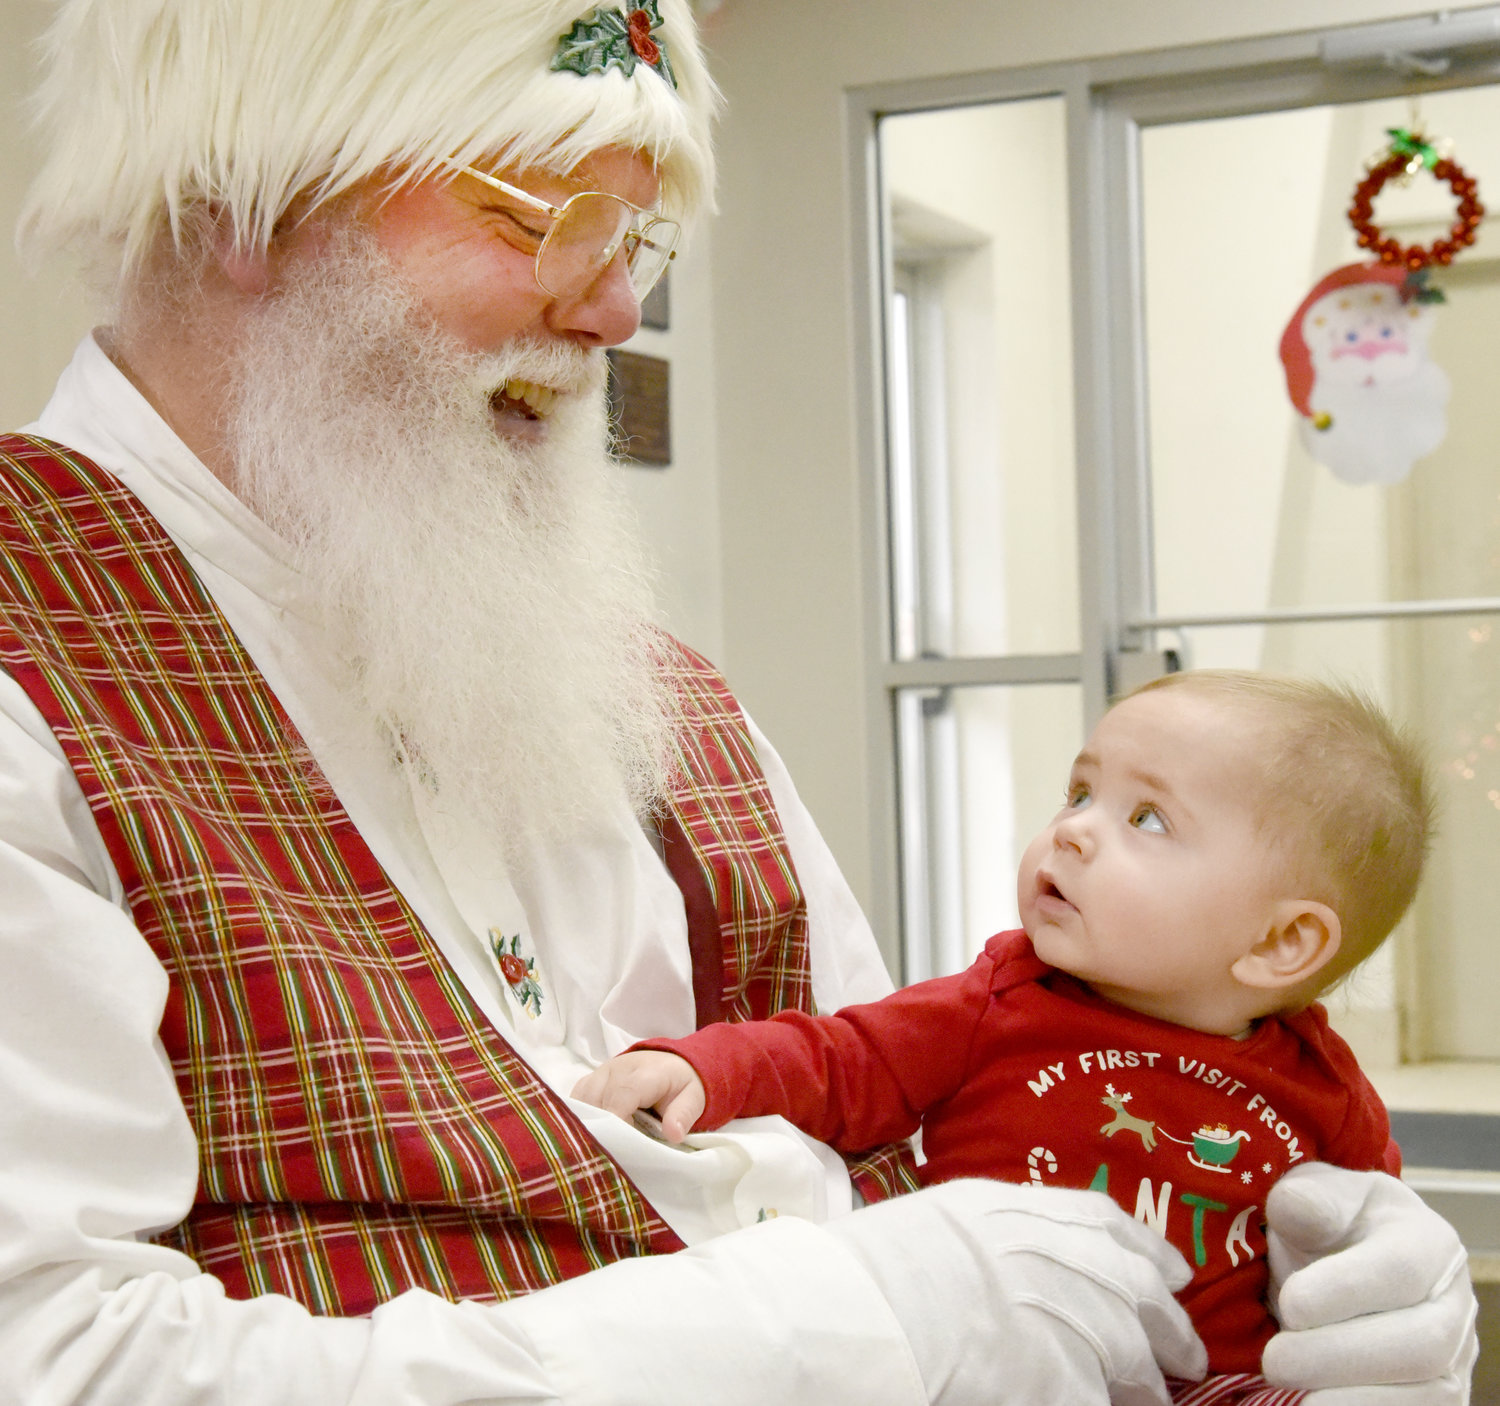 Santa fascinated 7-month-old Bo Redlinger when the baby had his first visit with the jolly old man on Dec. 14 at the Riverside fire station. Dozens of kids took their turn sitting on Santa’s lap while their parents could buy Christmas cookies sold by Trinity United Methodist Church.